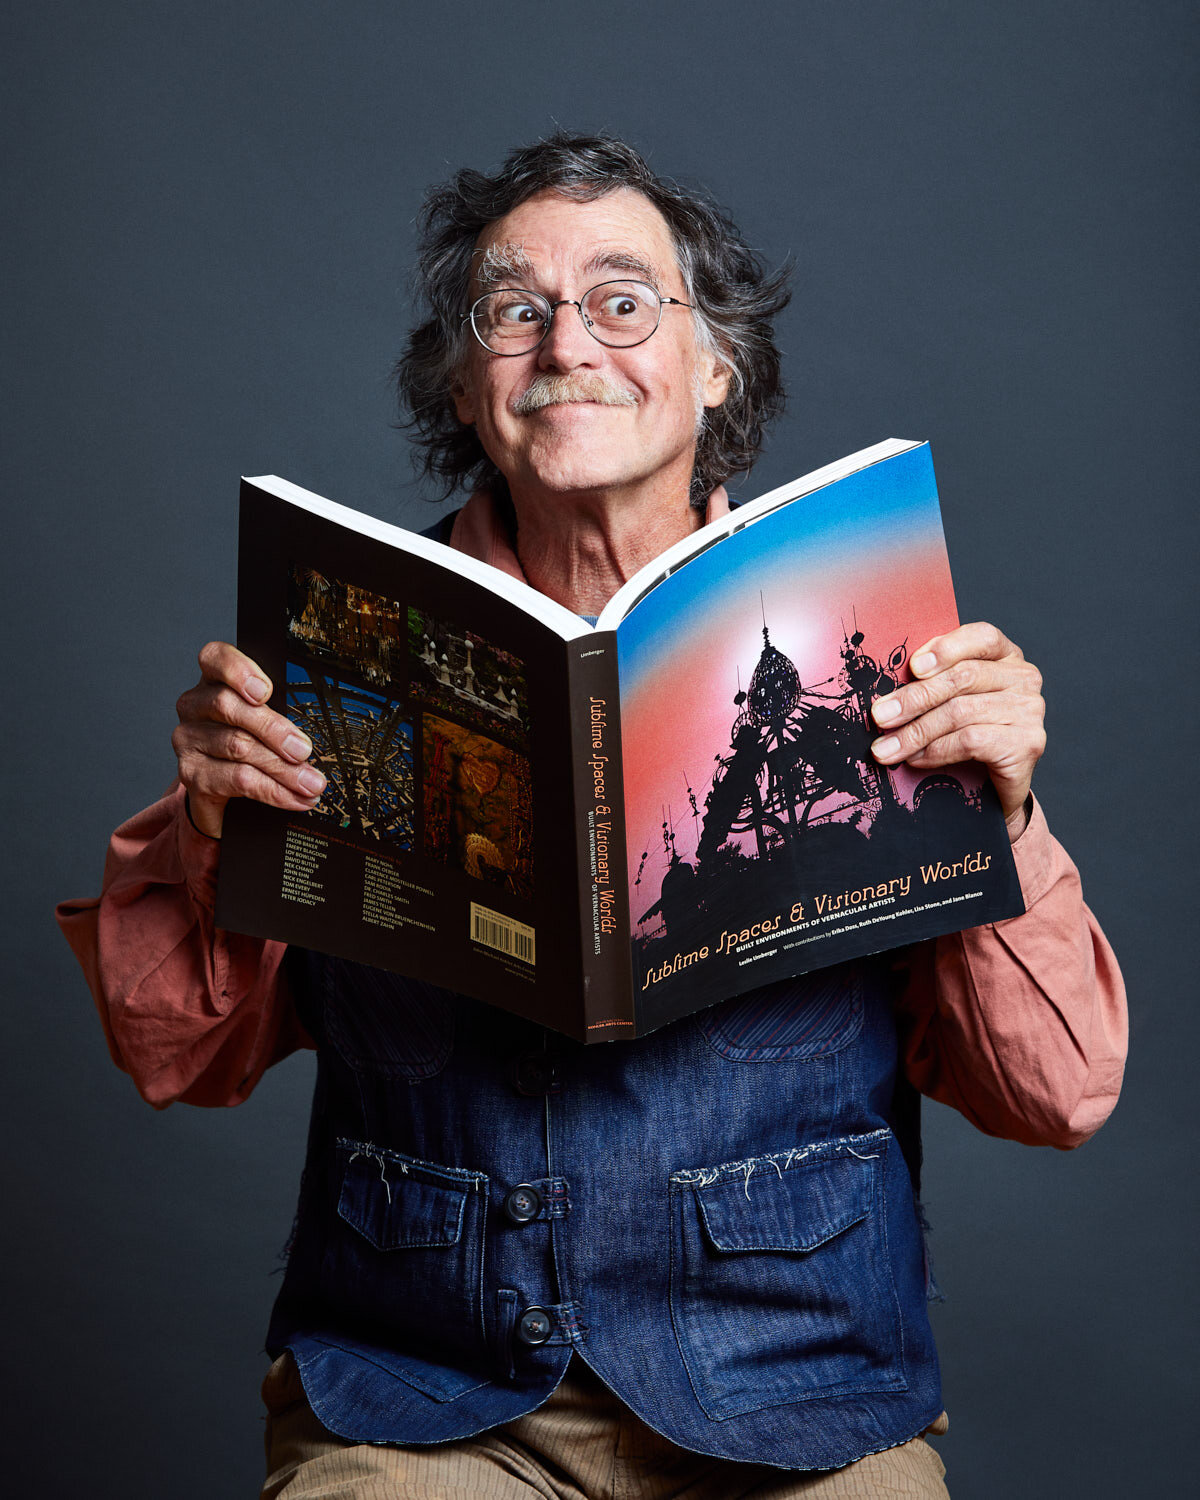 quirky portrait of photographer making silly face and holding his book